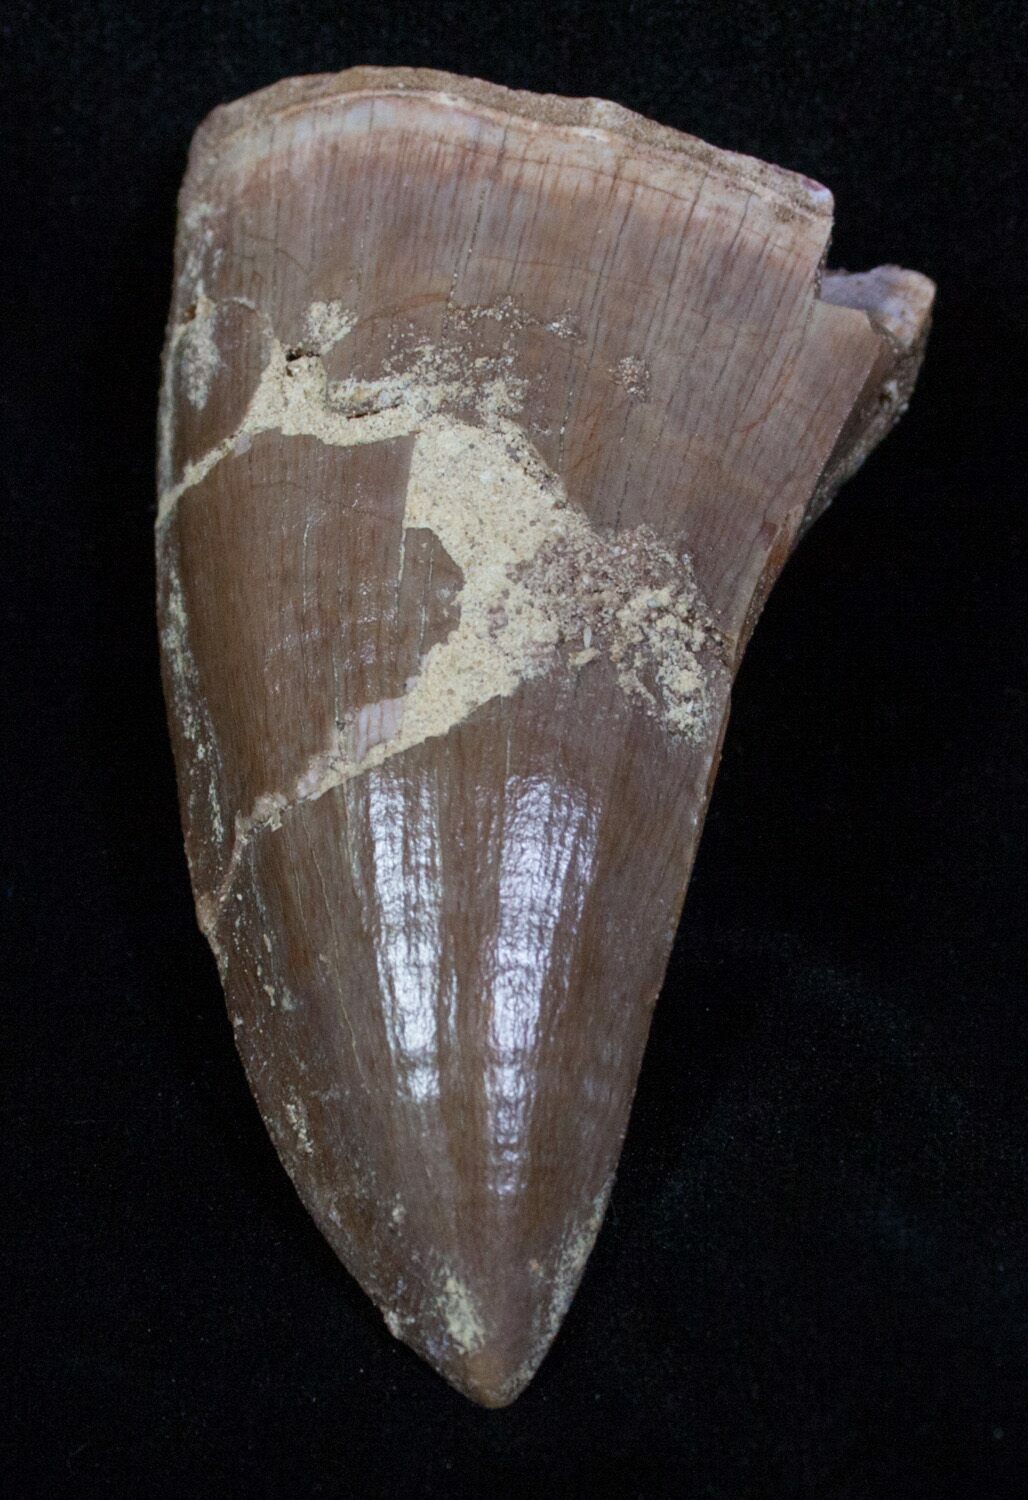 Large Mosasaur Tooth Free Of Matrix For Sale (#2278) - FossilEra.com